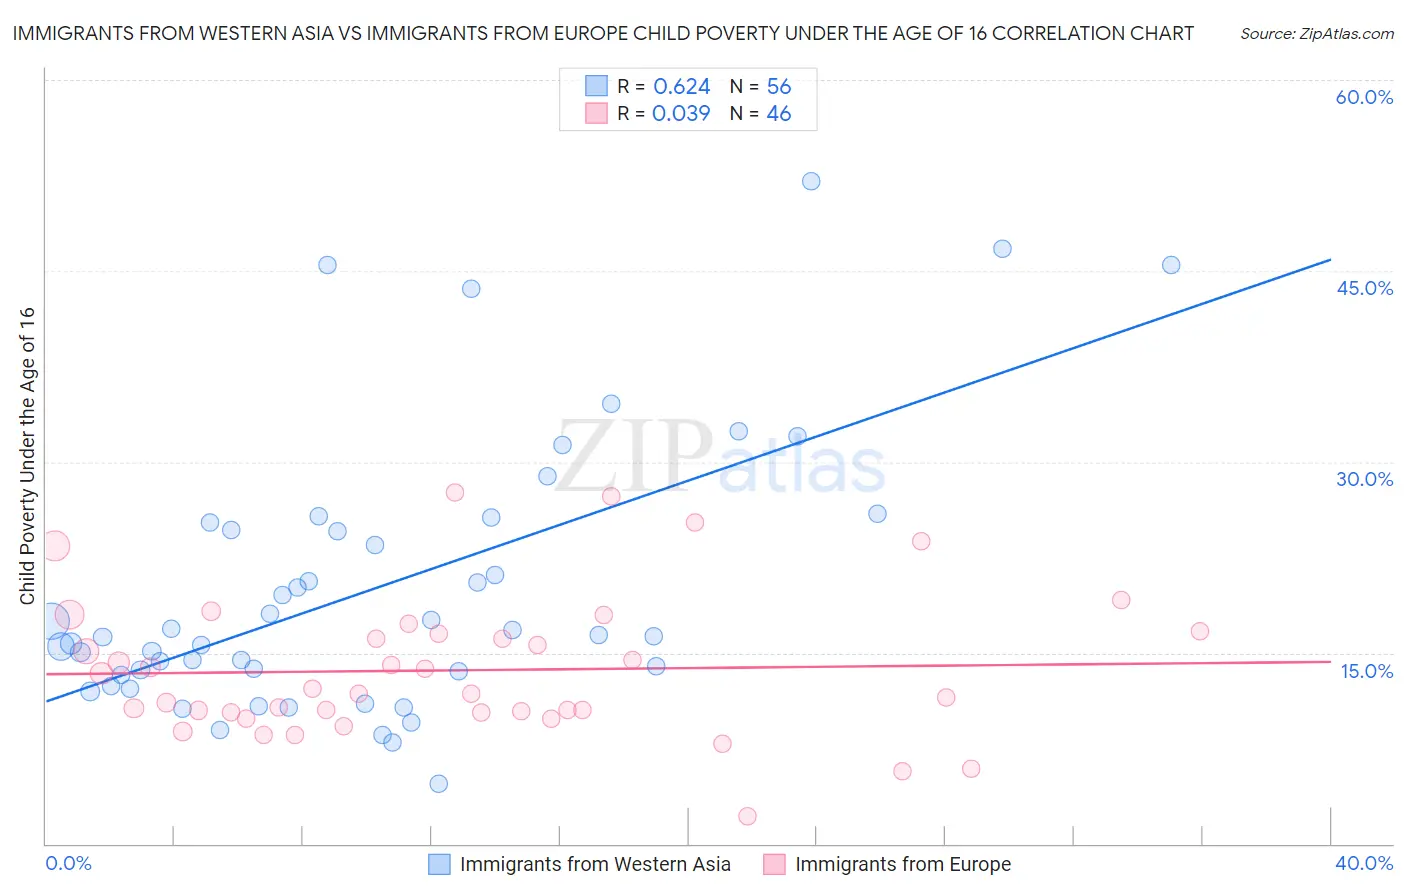 Immigrants from Western Asia vs Immigrants from Europe Child Poverty Under the Age of 16